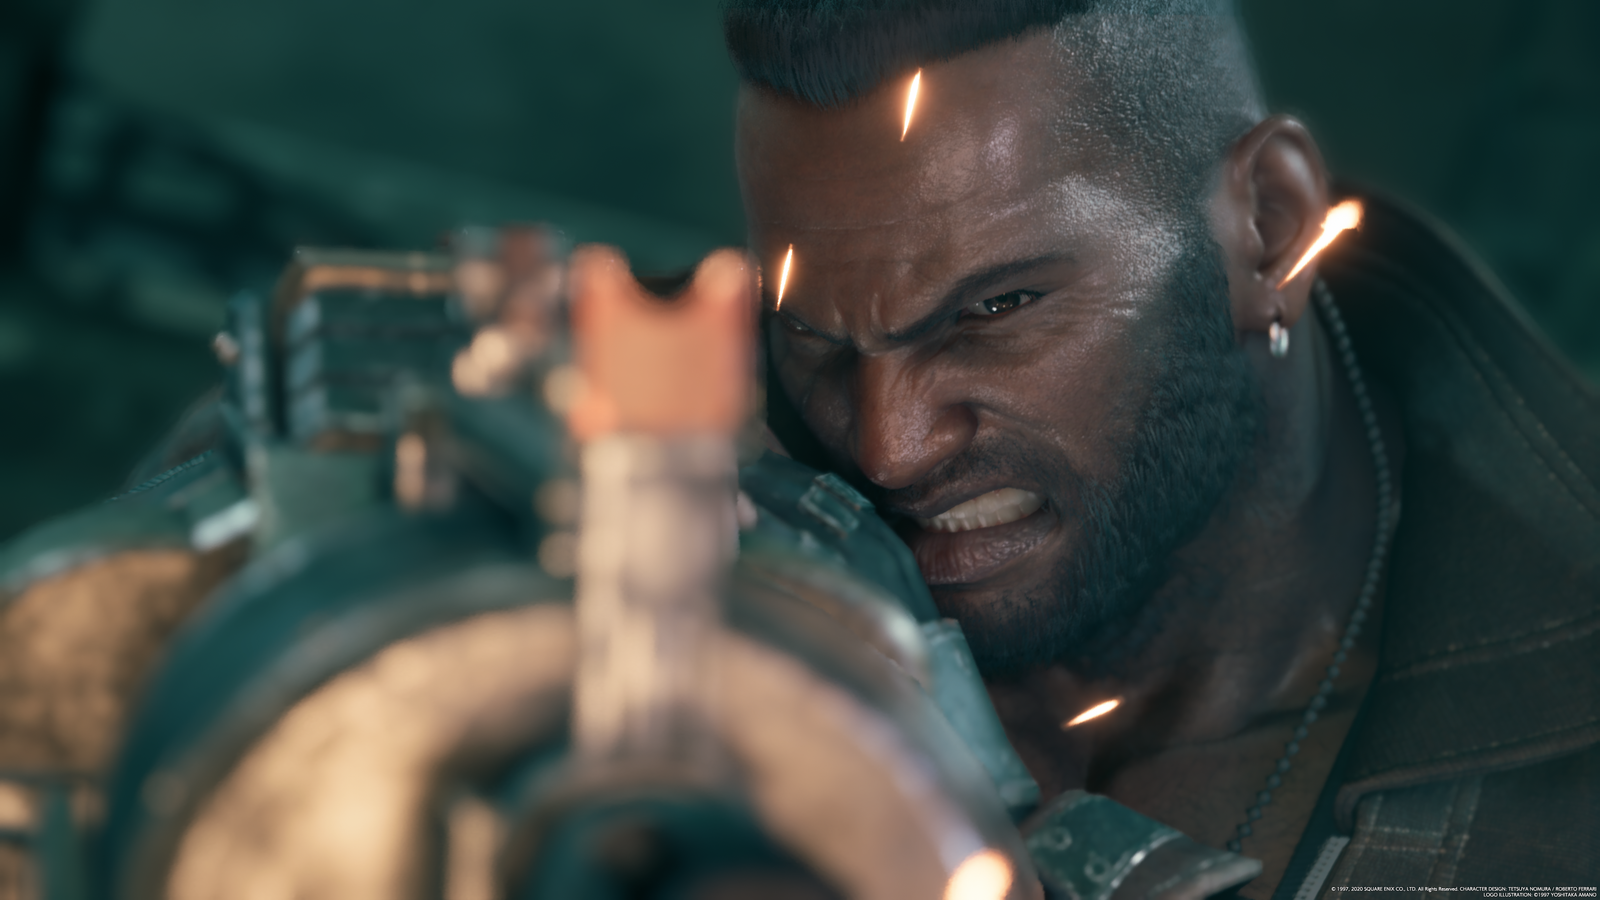 Final Fantasy 7 Remake differences explained